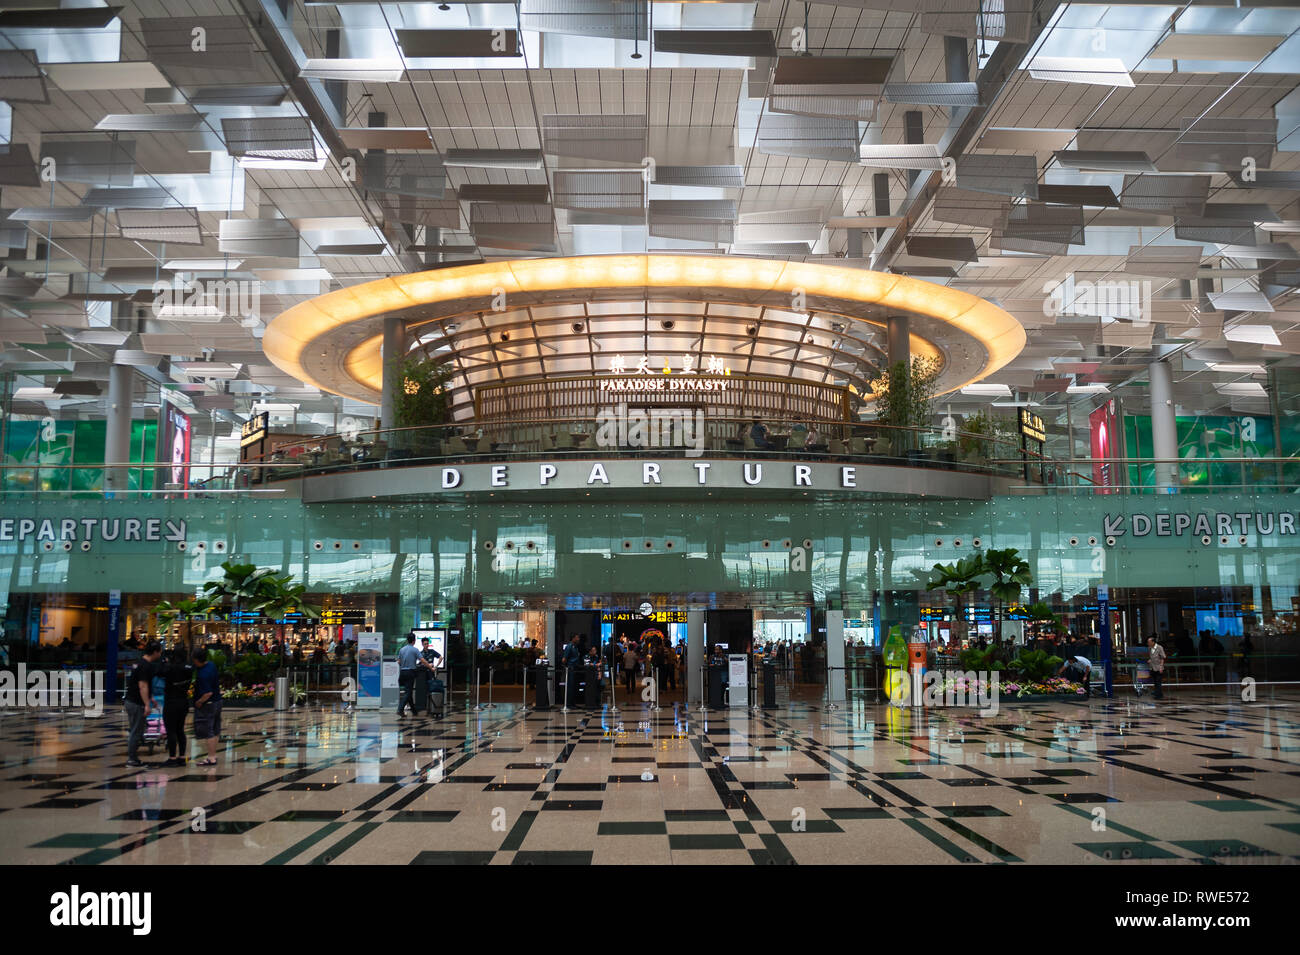 01.03.2019, Singapore, Republic of Singapore, Asia - A view of the departure hall inside Terminal 3 at Singapore's Changi Airport. Stock Photo